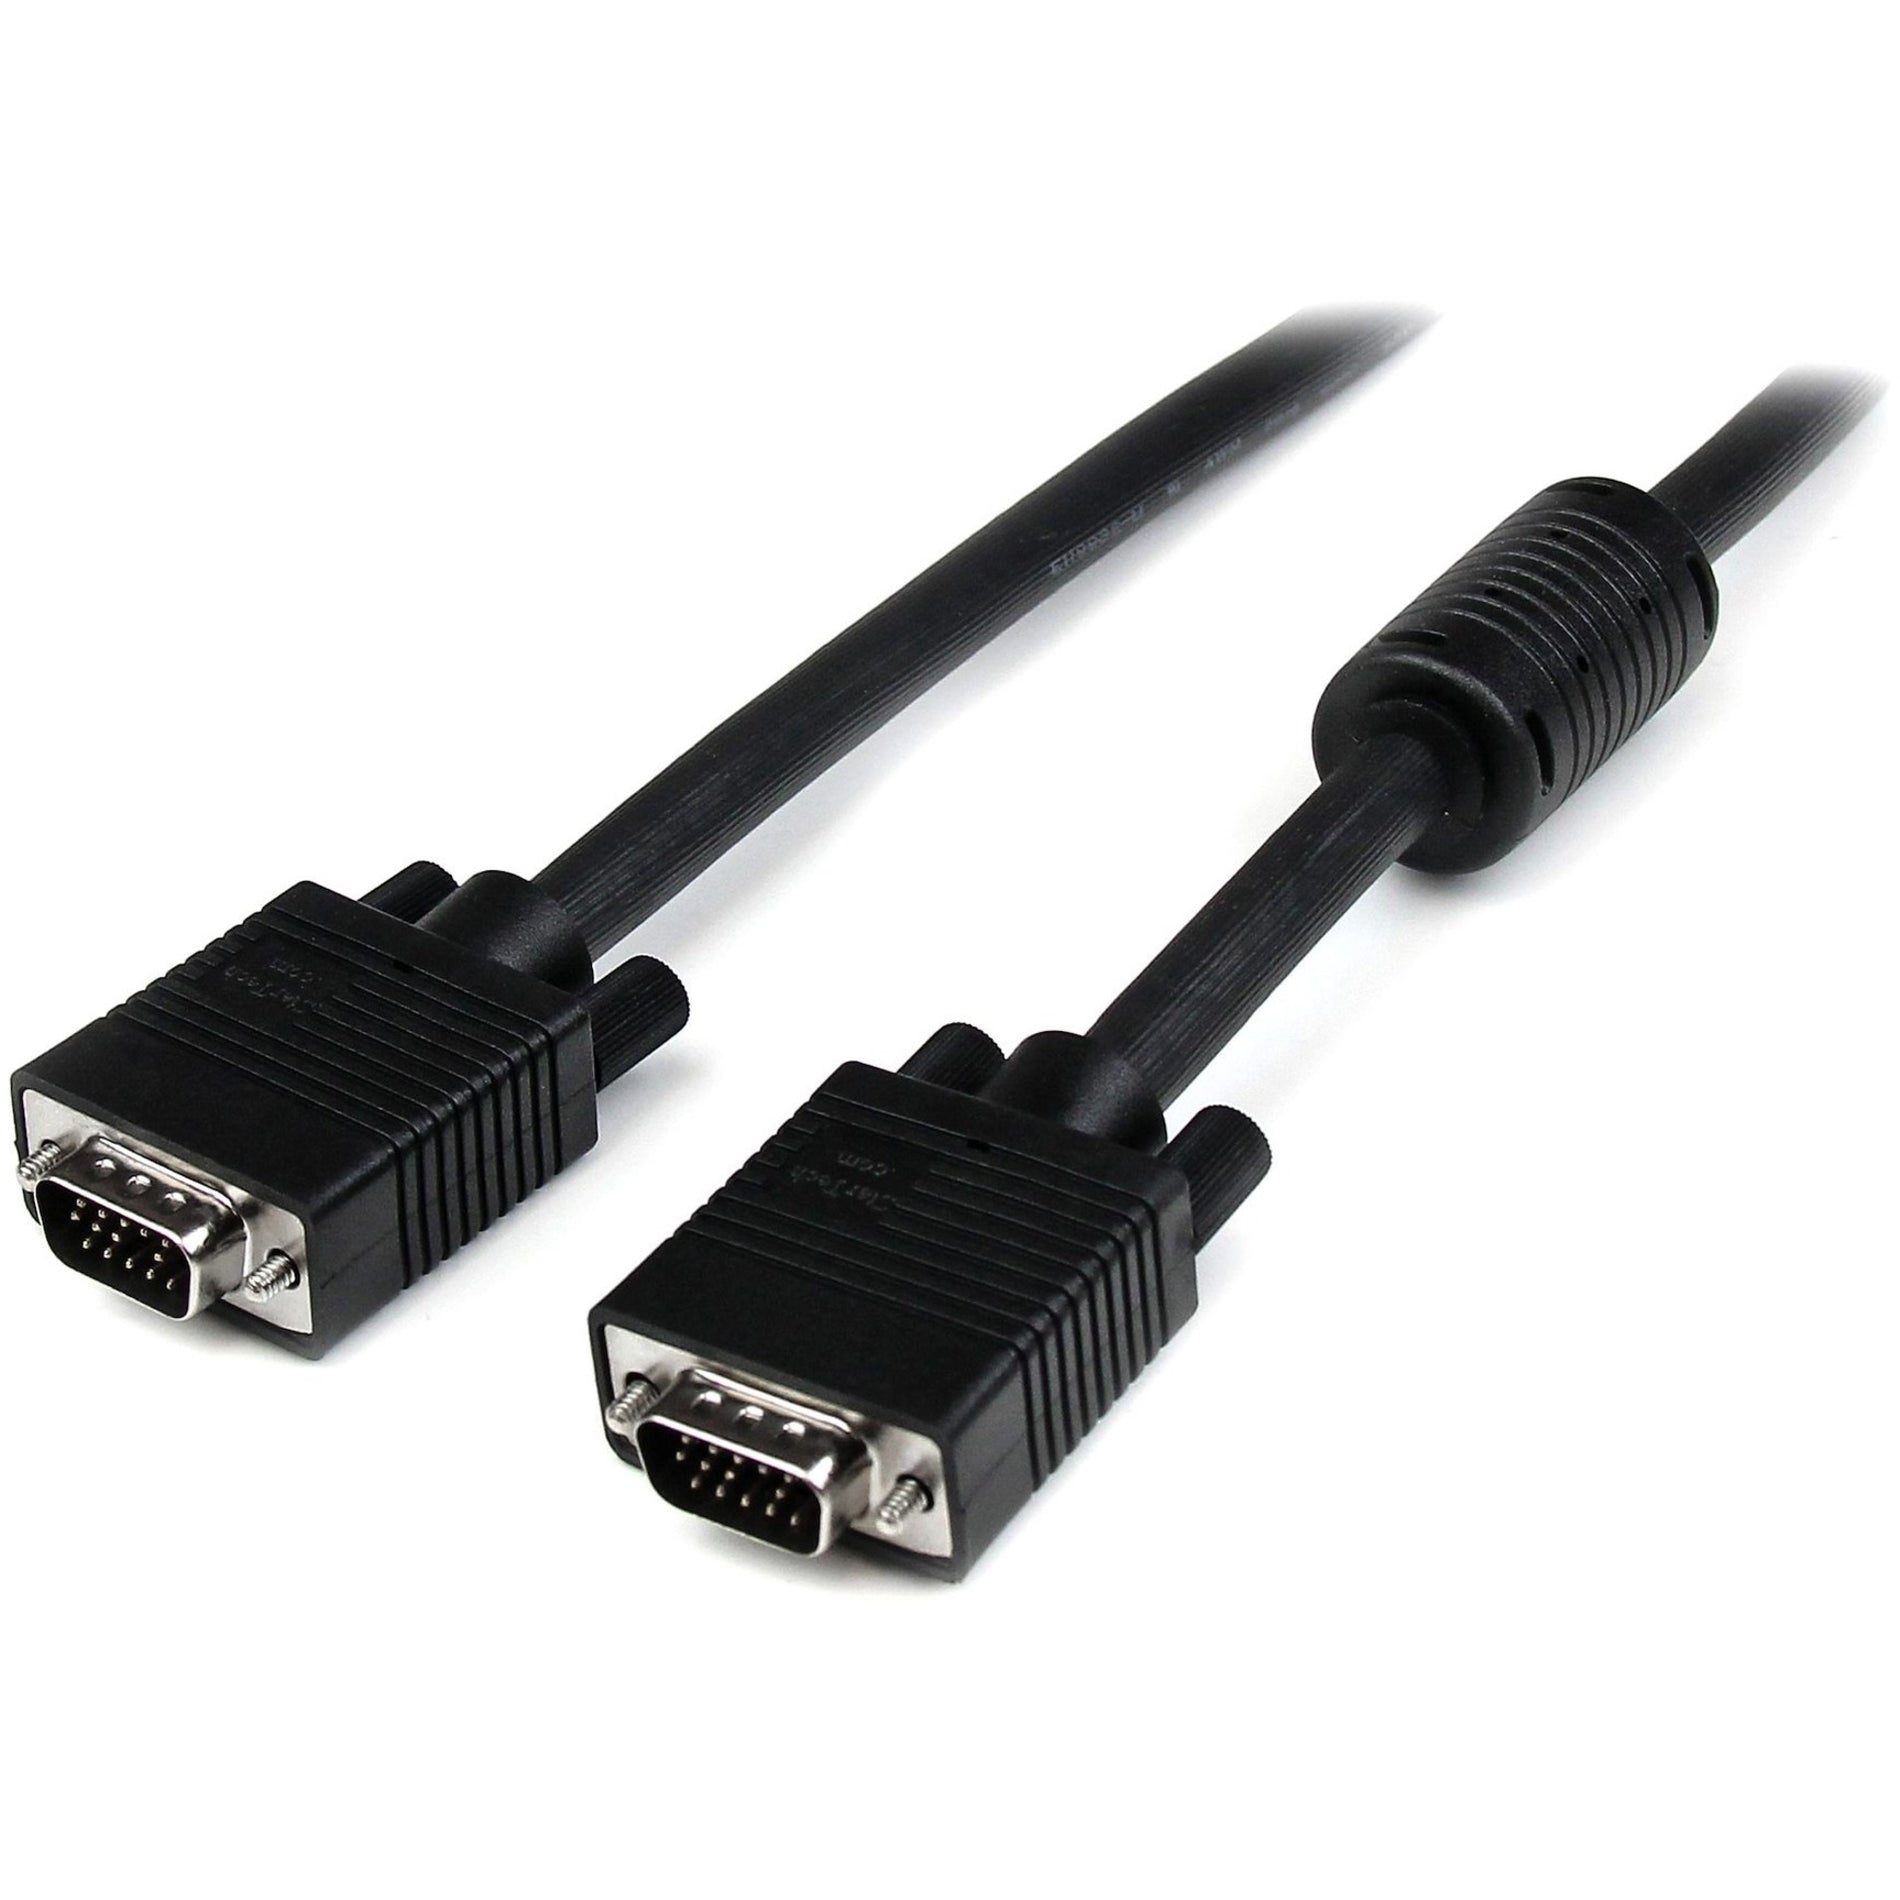 StarTech.com MXT101MMHQ20 20 ft Coax High Res Monitor VGA Cable HD15 M/M, Molded, Strain Relief, EMI Protection, Ferrite Bead, 1920 x 1200 Supported Resolution